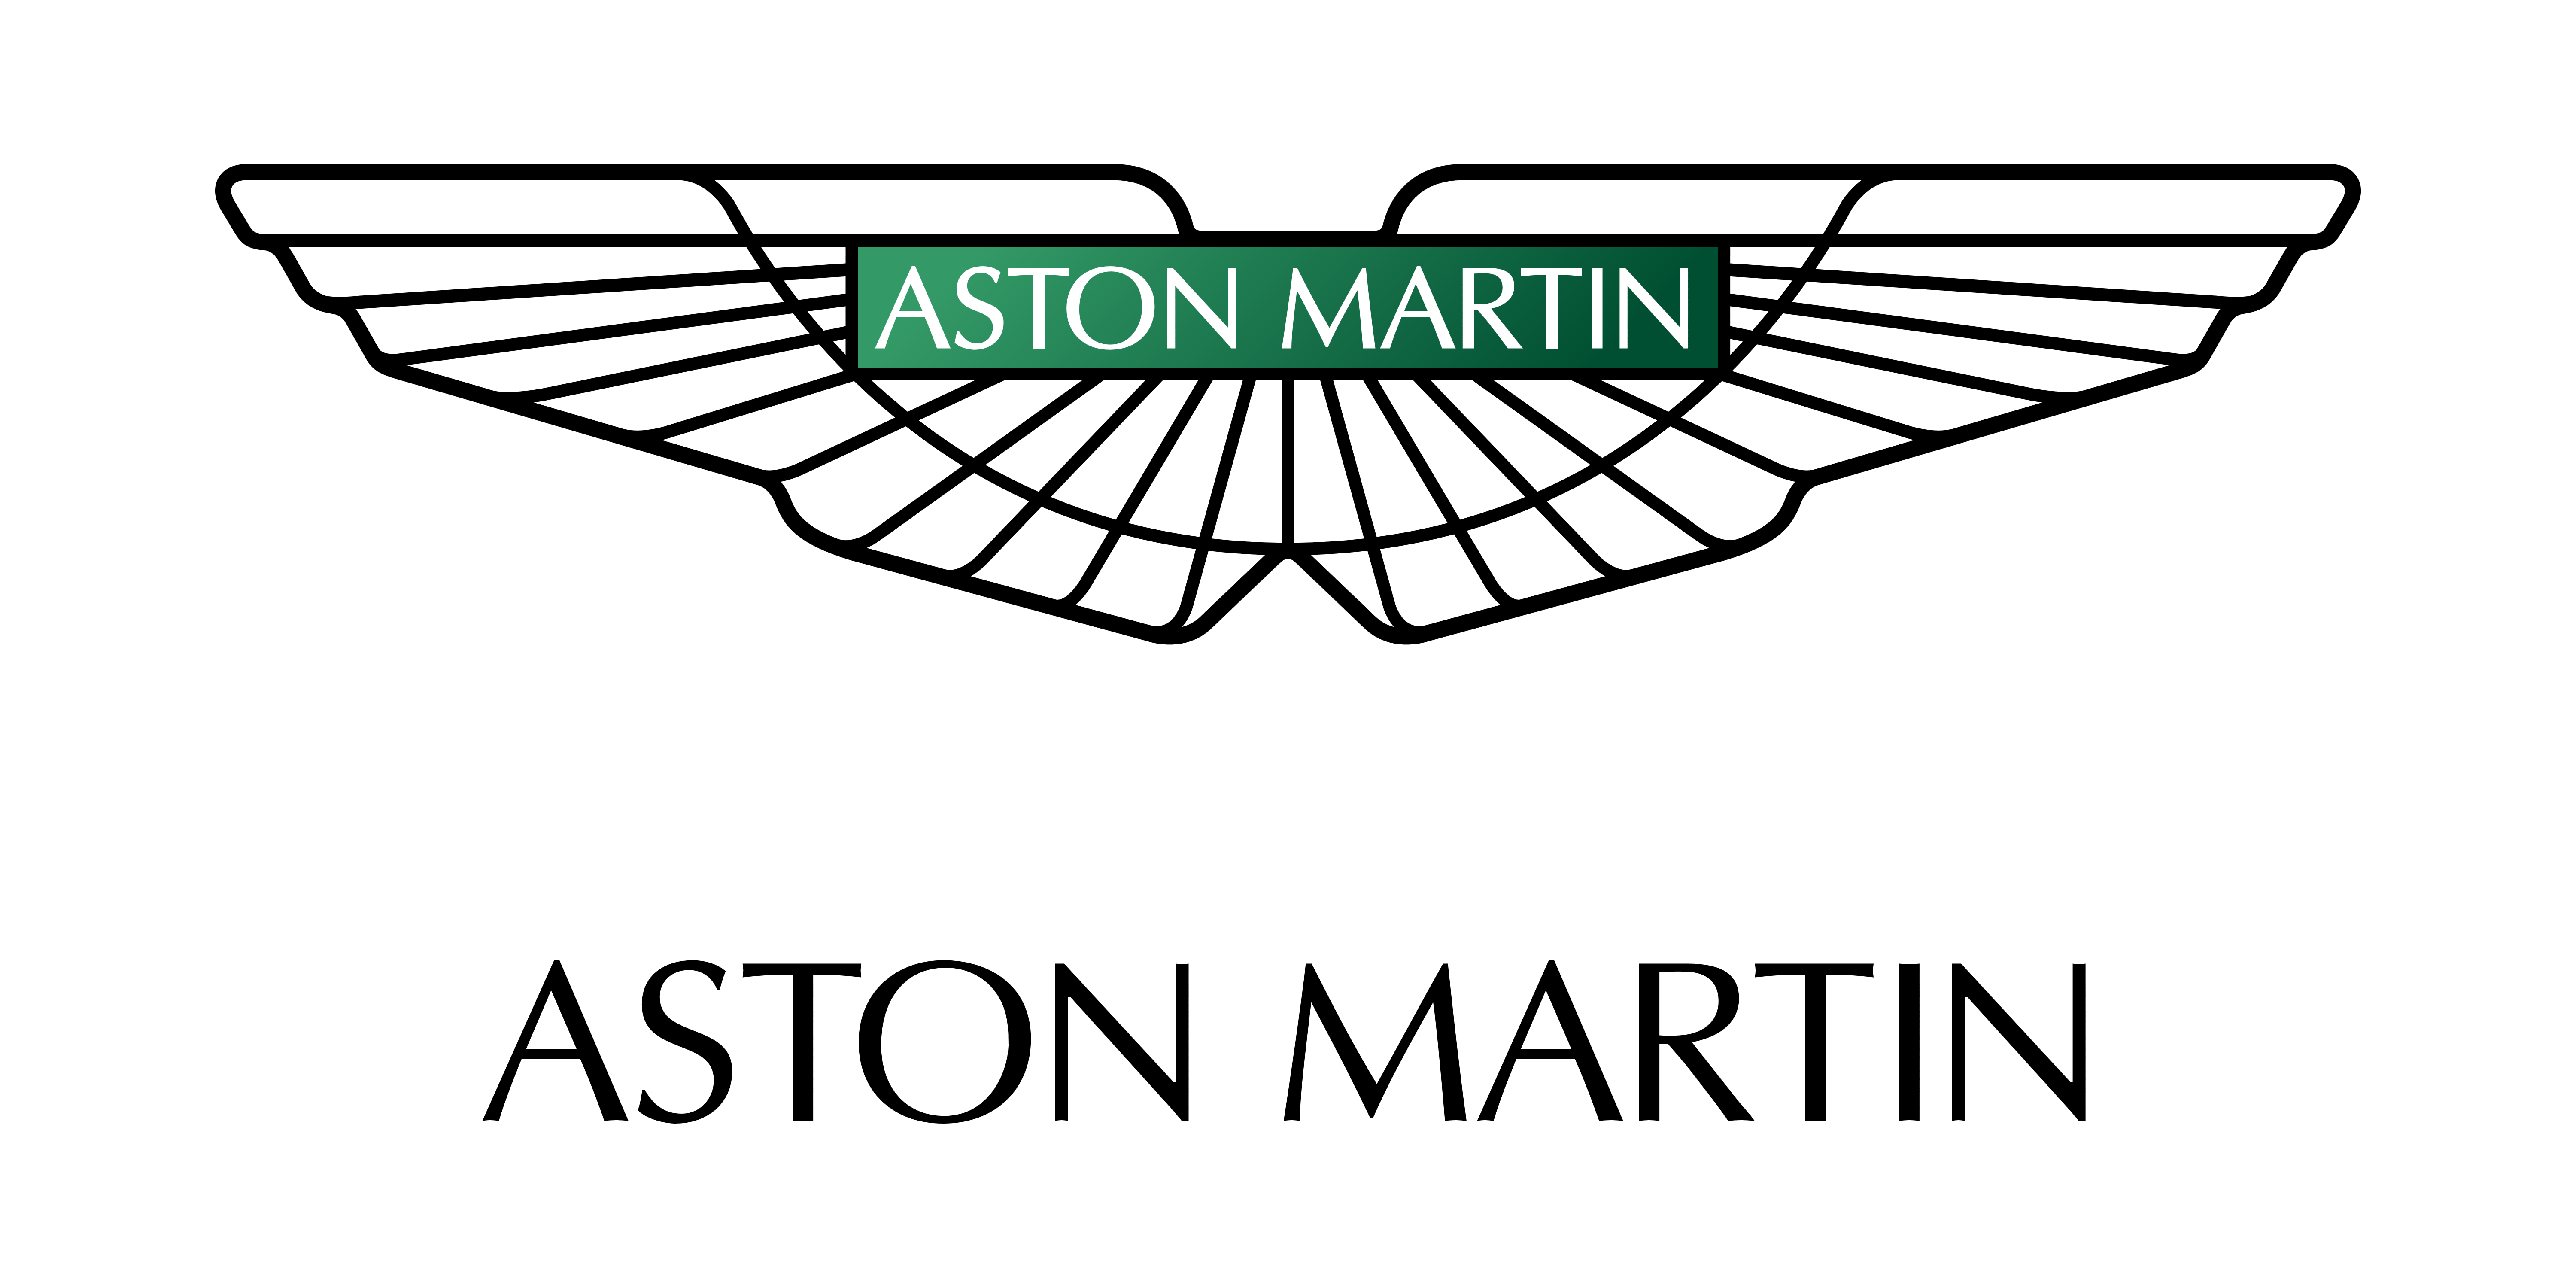 Aston Martin | Brands Of The 